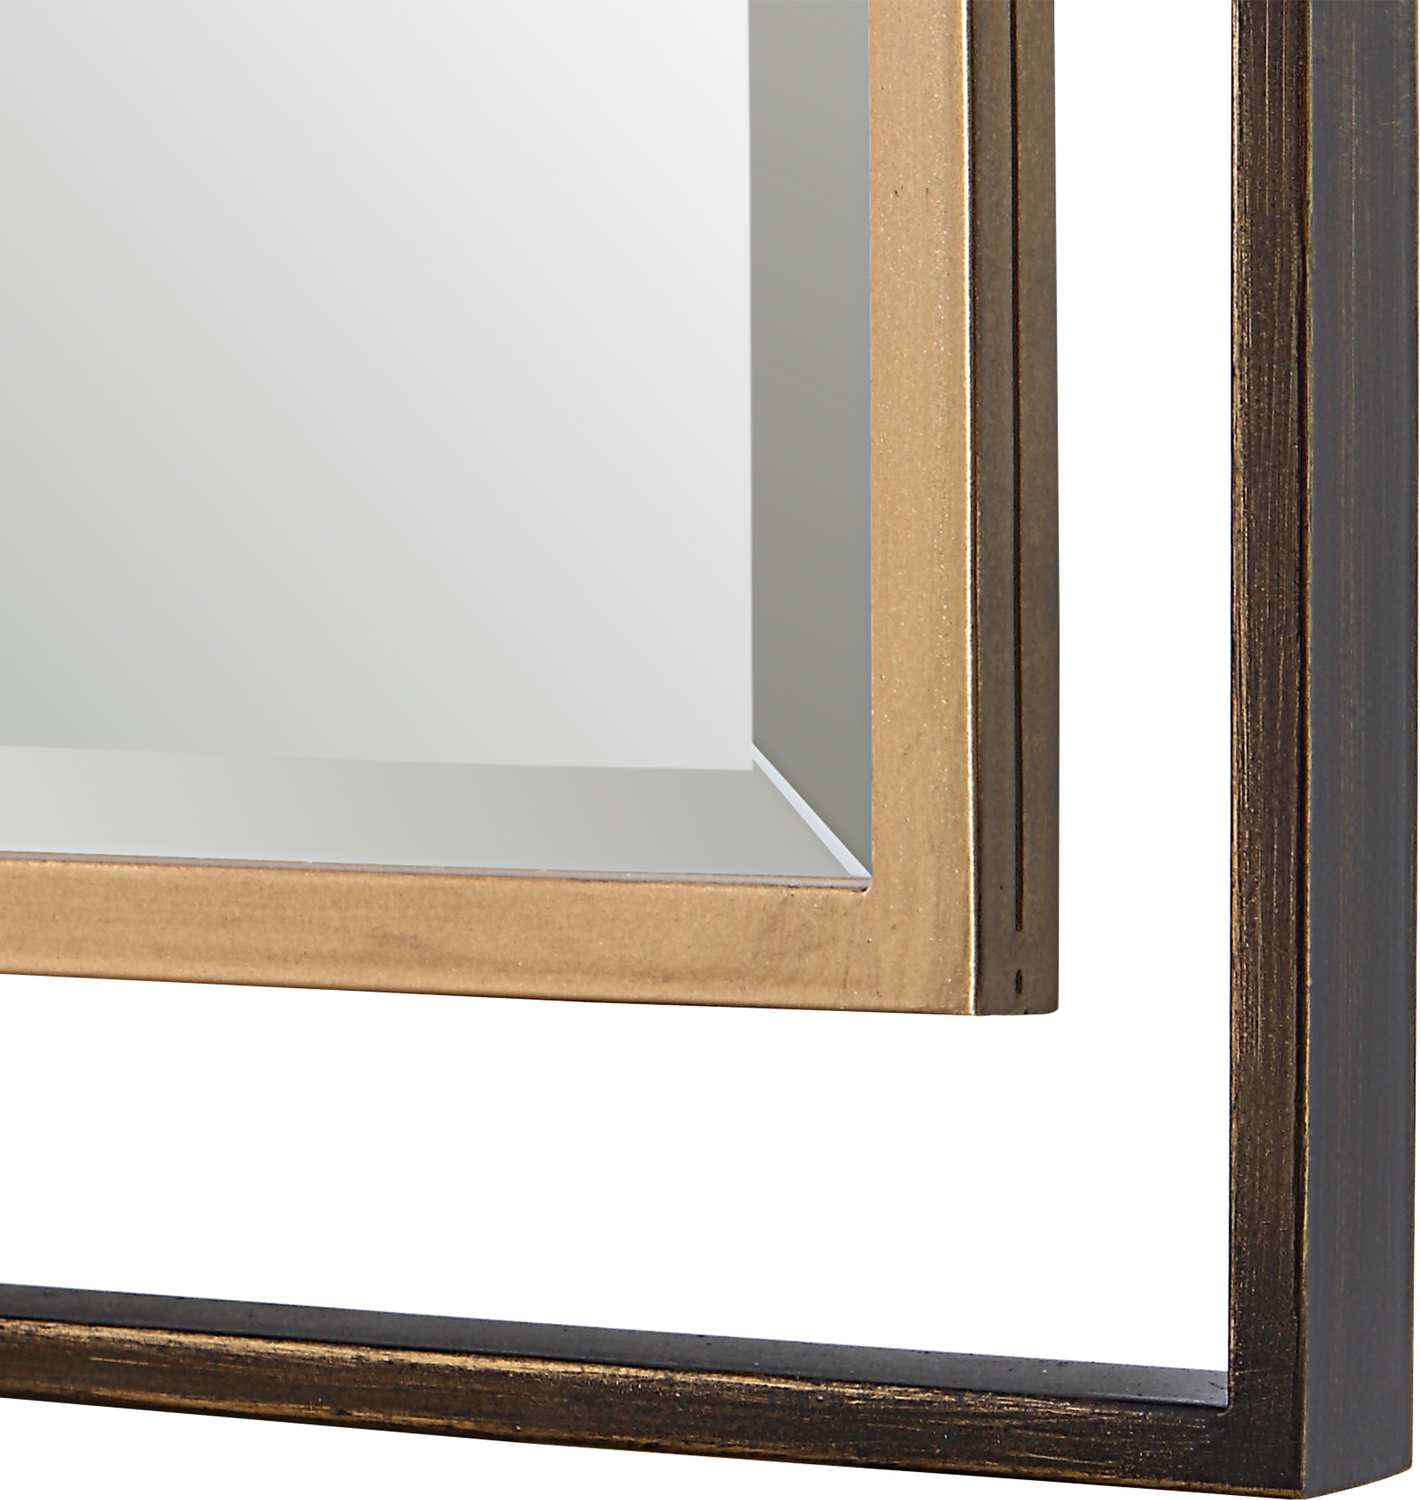 mirror design ideas Uttermost Tall Bronze & Gold Mirror This Iron Frame Features A 3-dimensional Design With An Outer Frame Finished In Distressed Rustic Bronze, Accented By A Lightly Antiqued Gold Leaf Inner Frame. This Mirror Is Complemented By A 1 1/4" Bevel And May Be Hung Horizontal Or Vertical.